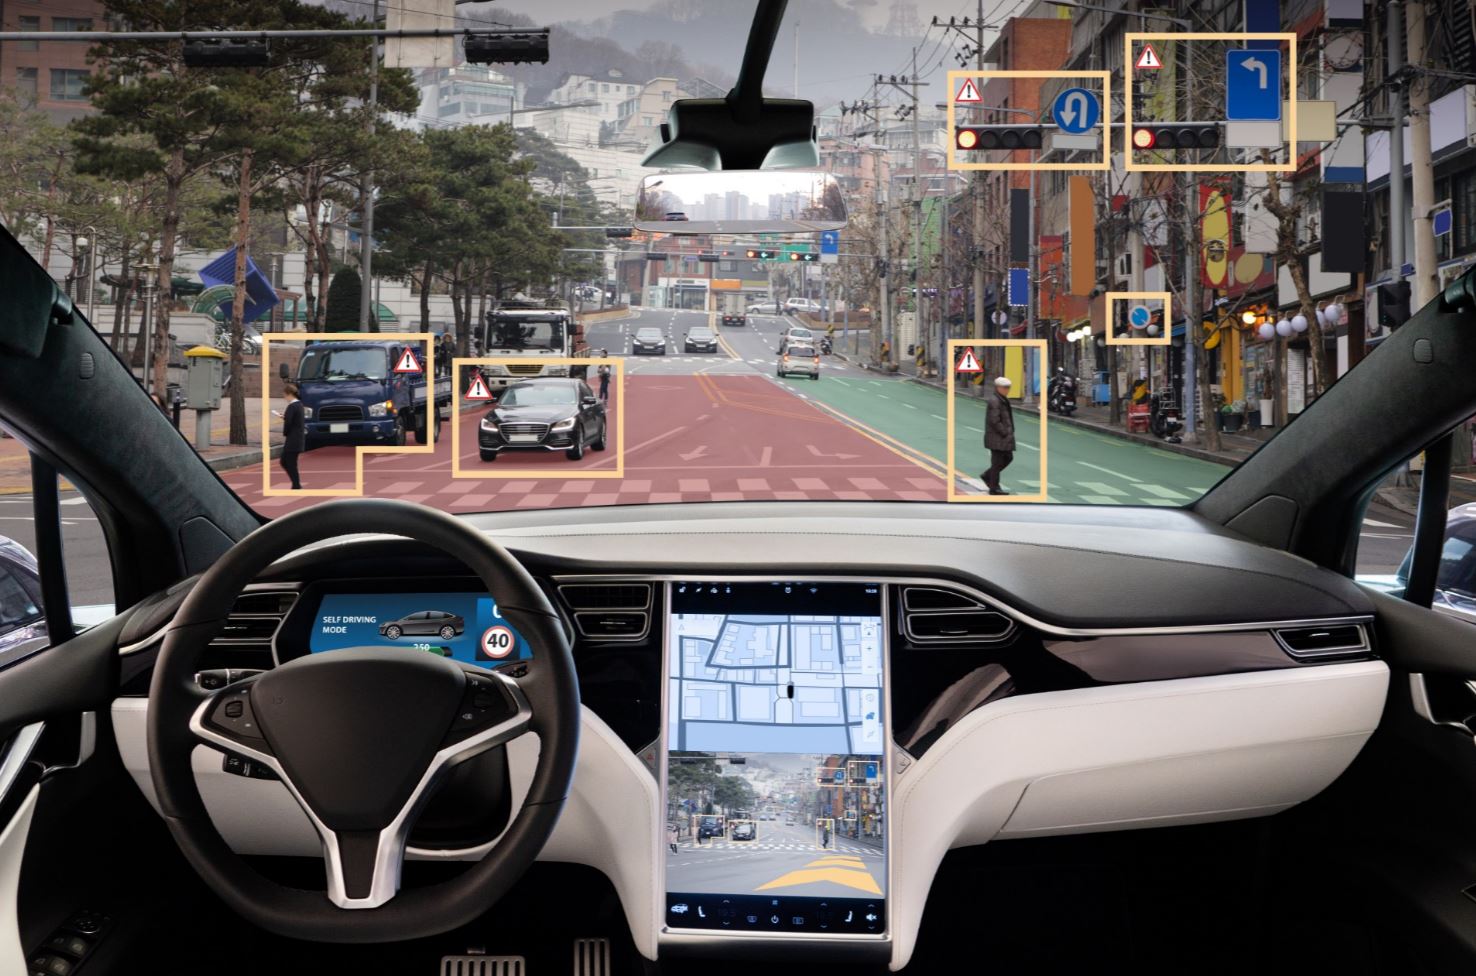 Driverless vehicle detecting road signs and pedestrians.